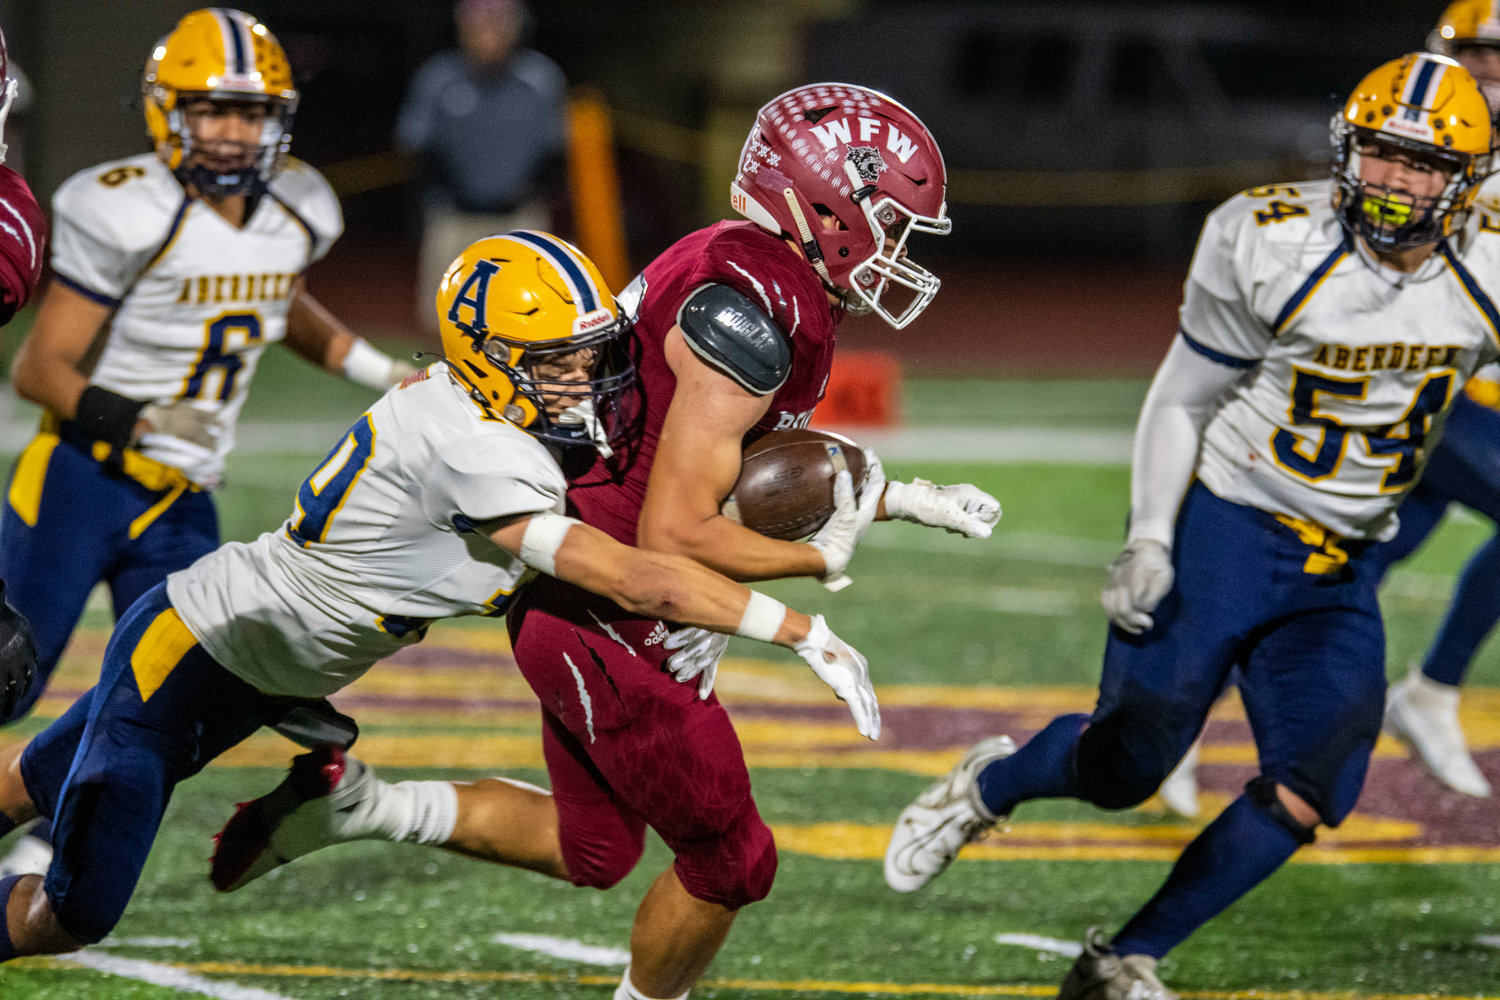 W.F. West's Declan McDonald fights off an Aberdeen defender on a punt return during a game at South Bend High School on Oct. 20.